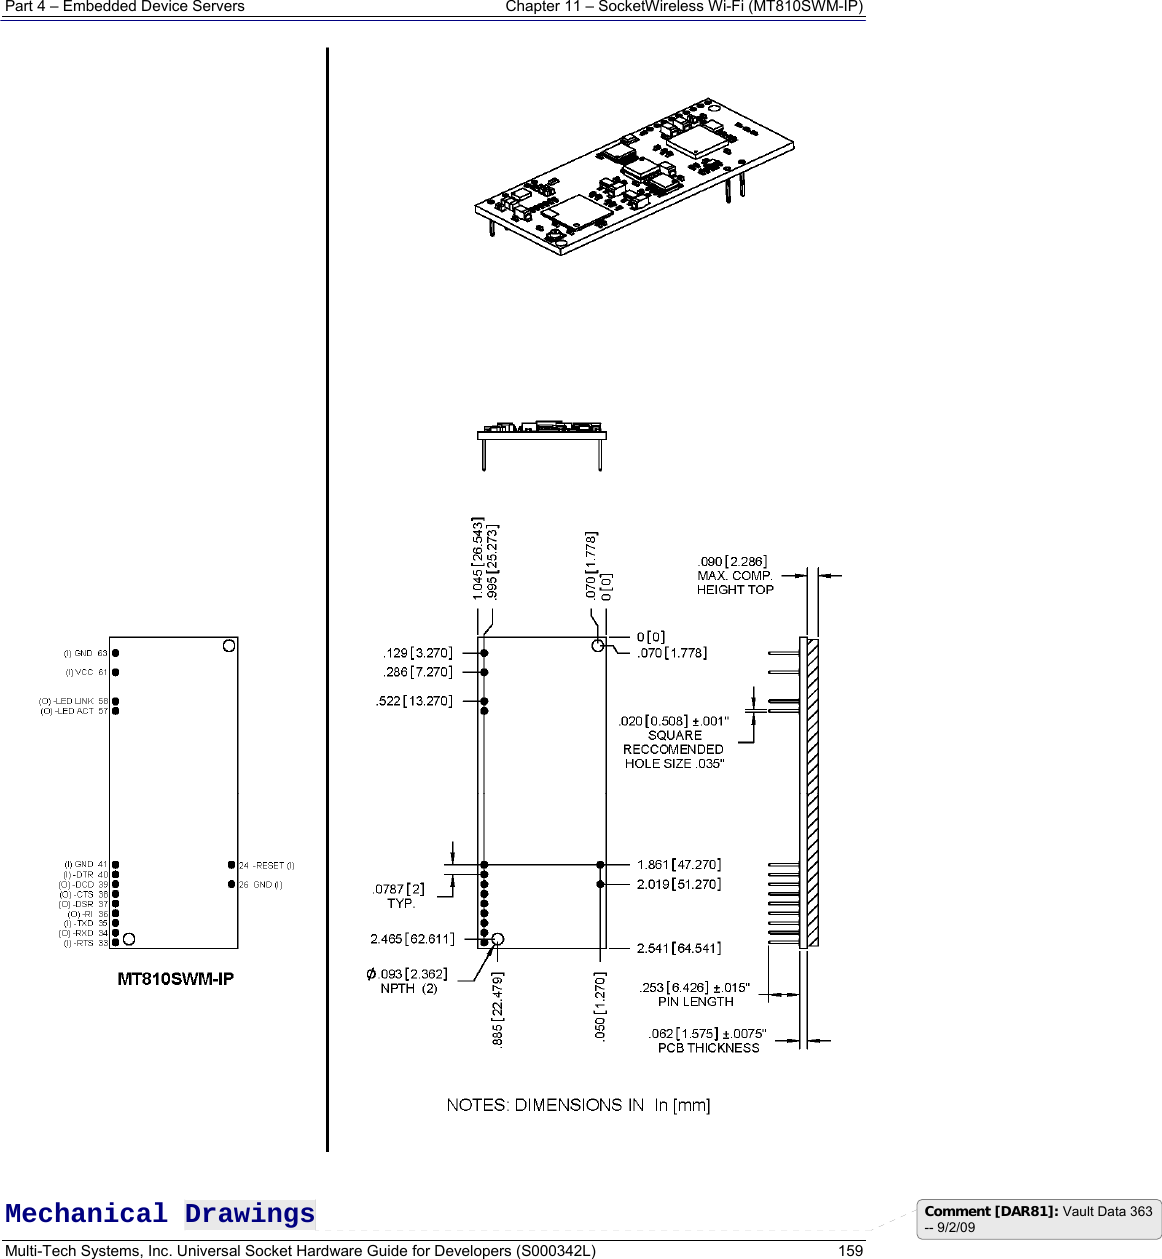 Part 4 – Embedded Device Servers  Chapter 11 – SocketWireless Wi-Fi (MT810SWM-IP) Multi-Tech Systems, Inc. Universal Socket Hardware Guide for Developers (S000342L)  159   Mechanical Drawings  Comment [DAR81]: Vault Data 363 -- 9/2/09 